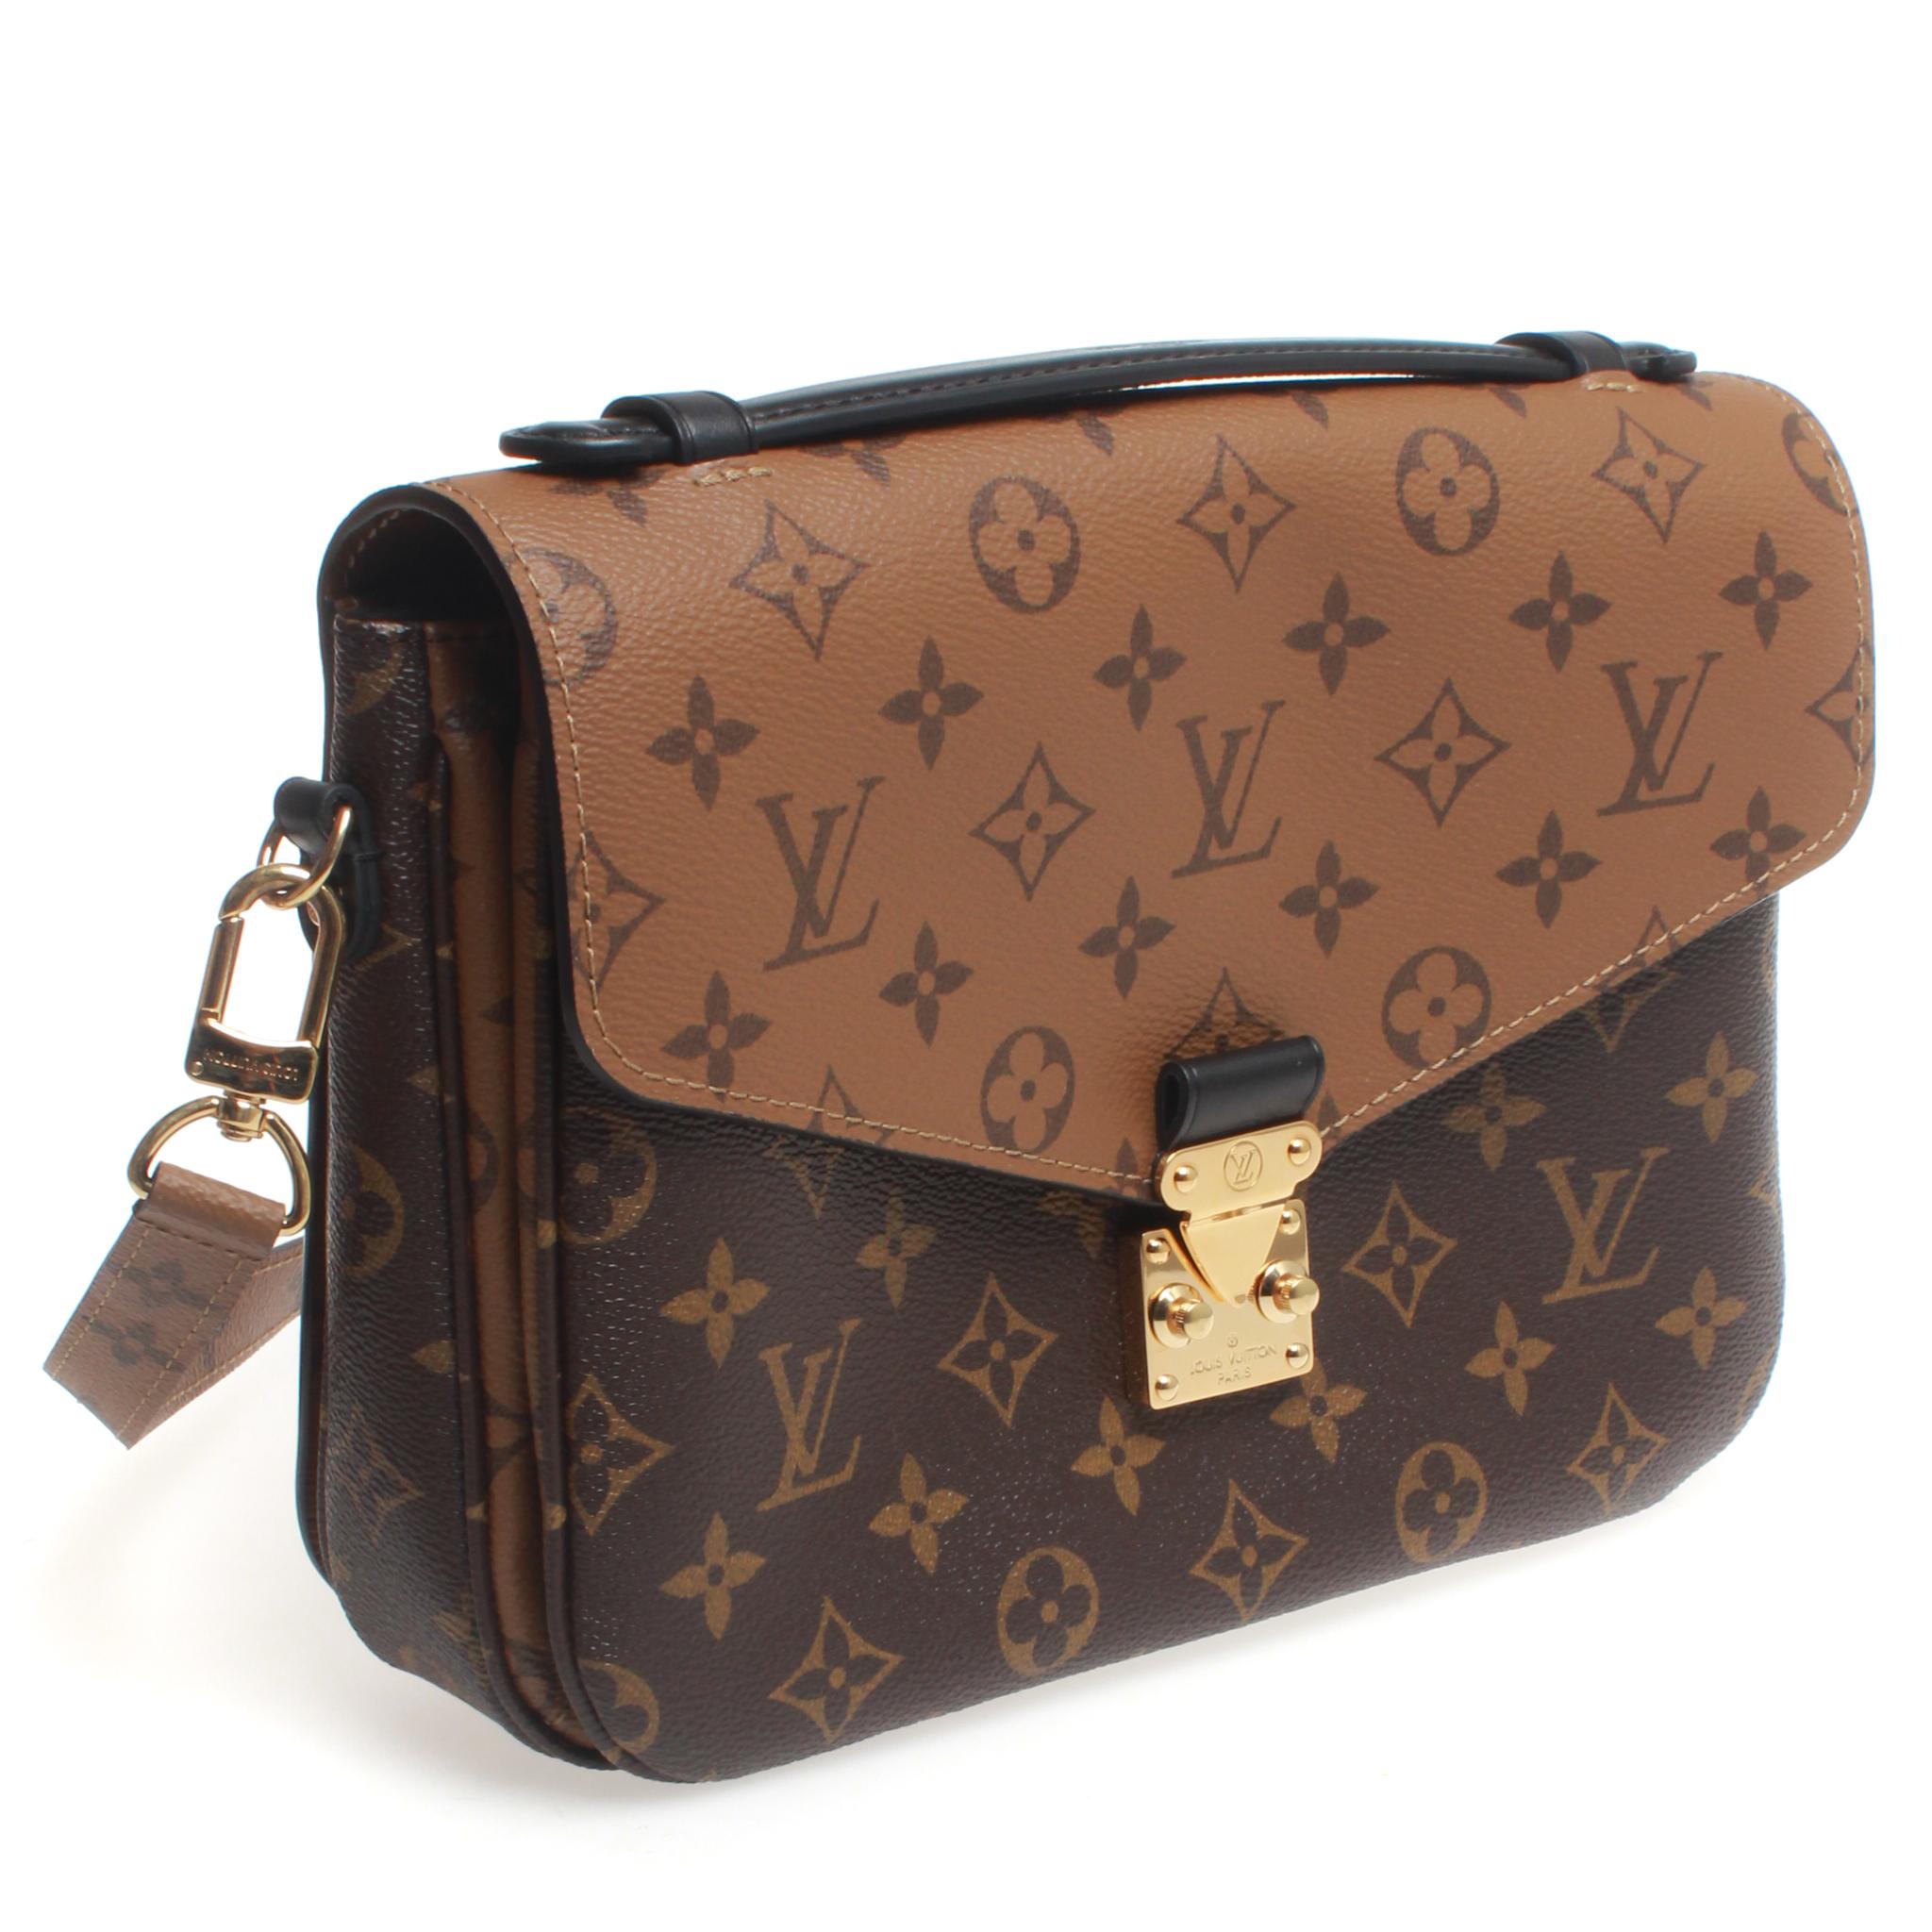 Serial no #DU1118. Louis Vuitton Pochette Metis monogram reverse canvas cross body bag featuring 3 interior pockets and removable/adjustable strap. Calf leather outer and micro fibre lining